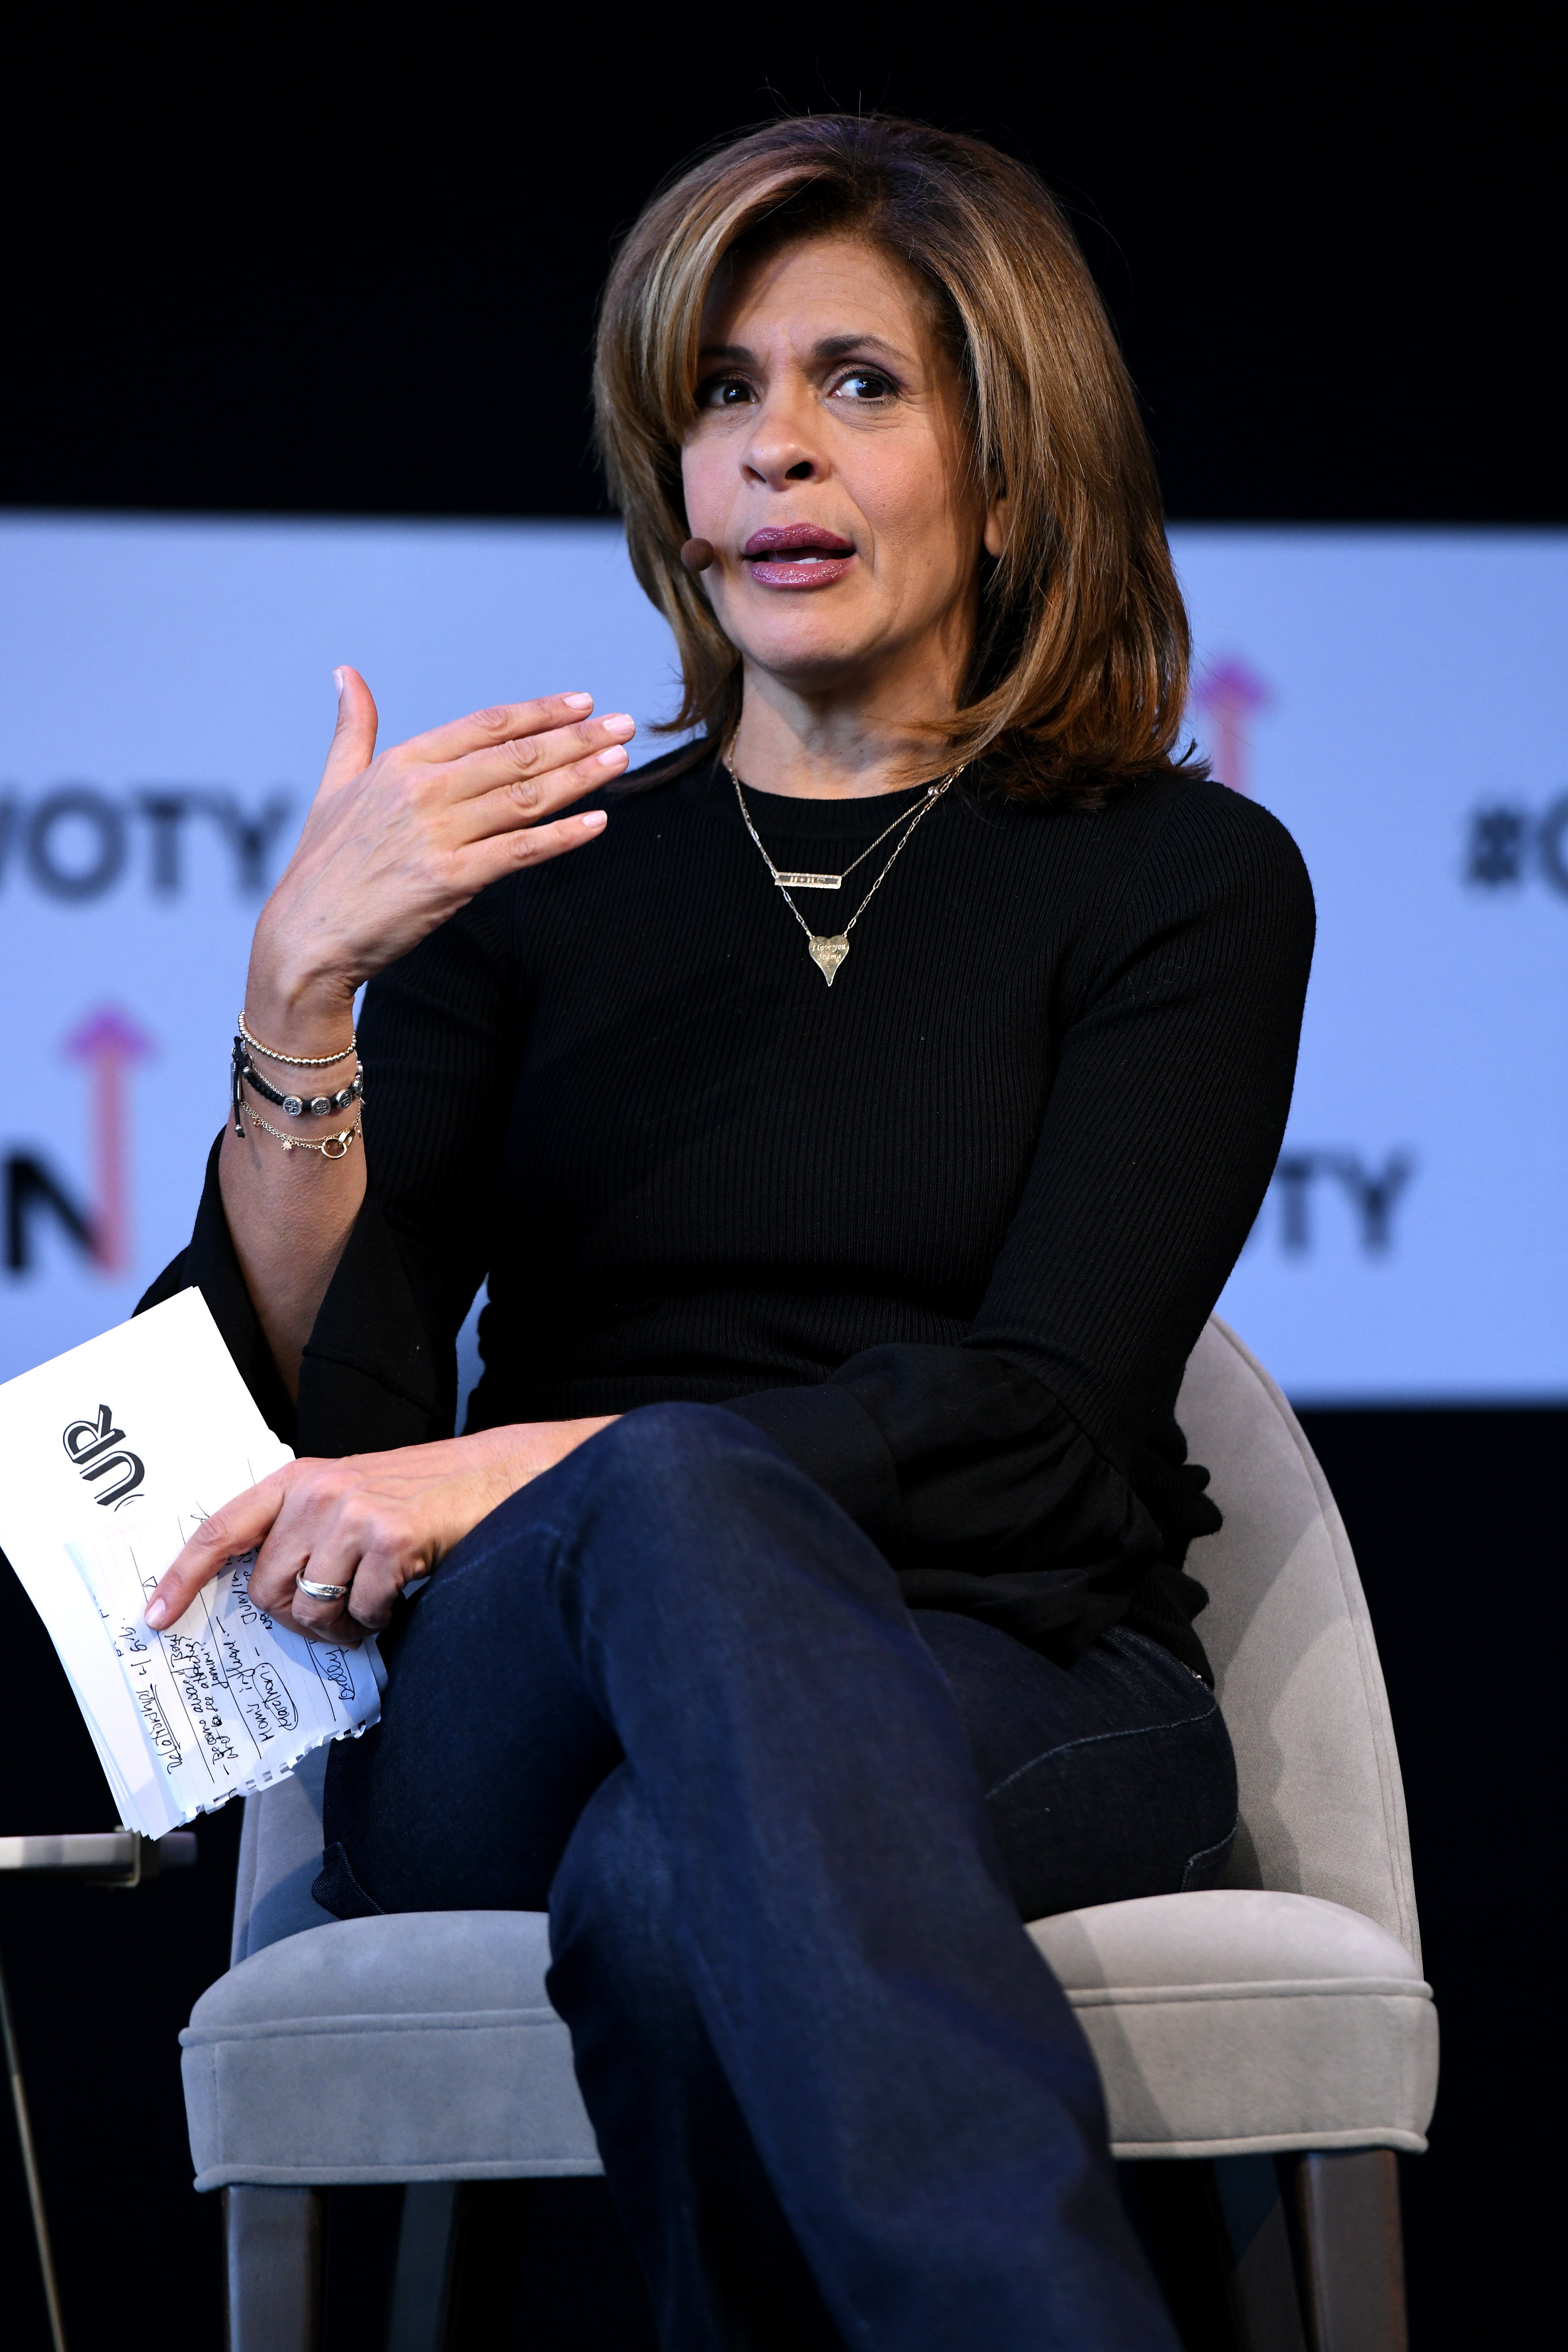 Hoda Kotb speaks at the "Closing the Dream Gap: Showing Girls What's Next" panel event in New York City on November 11, 2018 | Photo: Getty Images